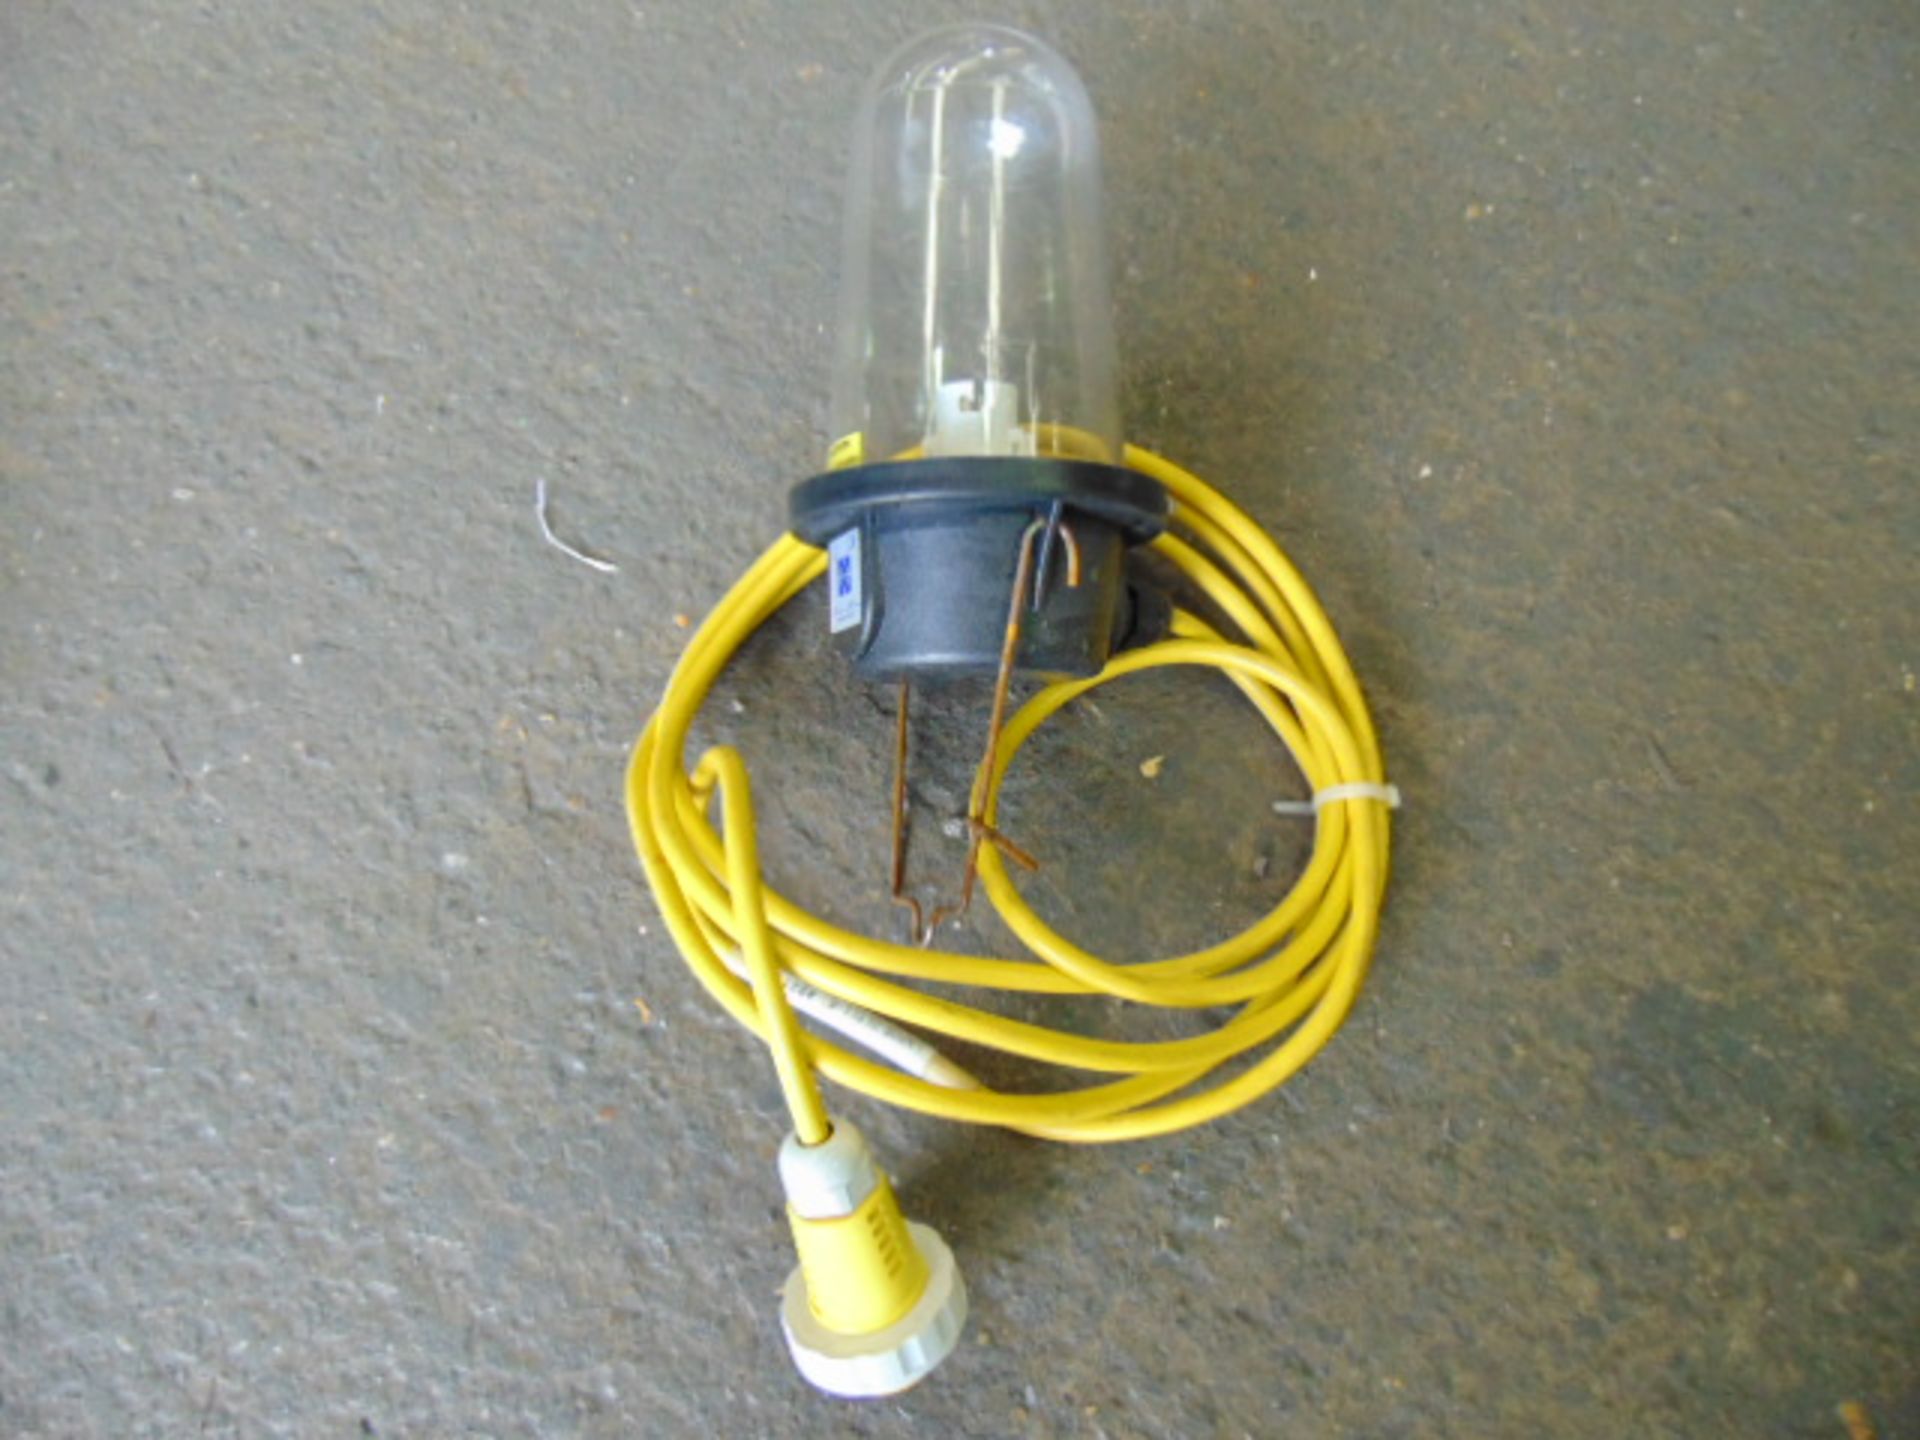 5 x Lewden Portable Worklights - Image 2 of 5